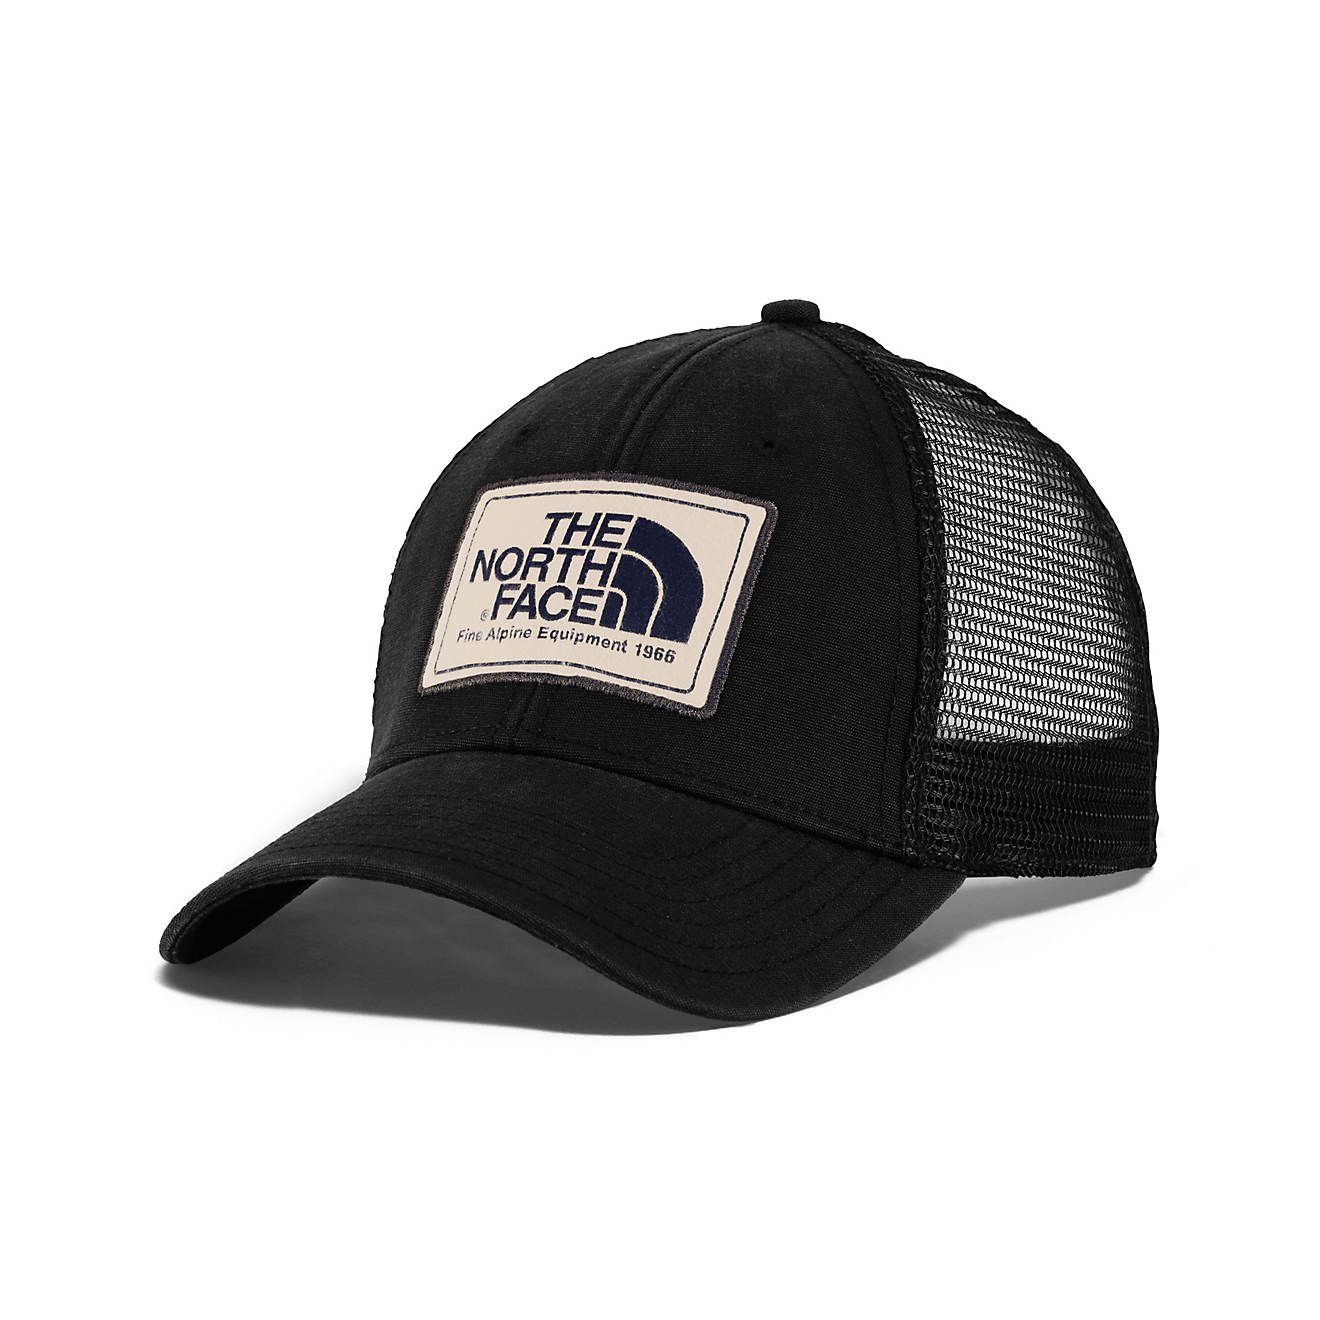 The North Face Men's Mudder Trucker Hat | Academy Sports + Outdoor Affiliate